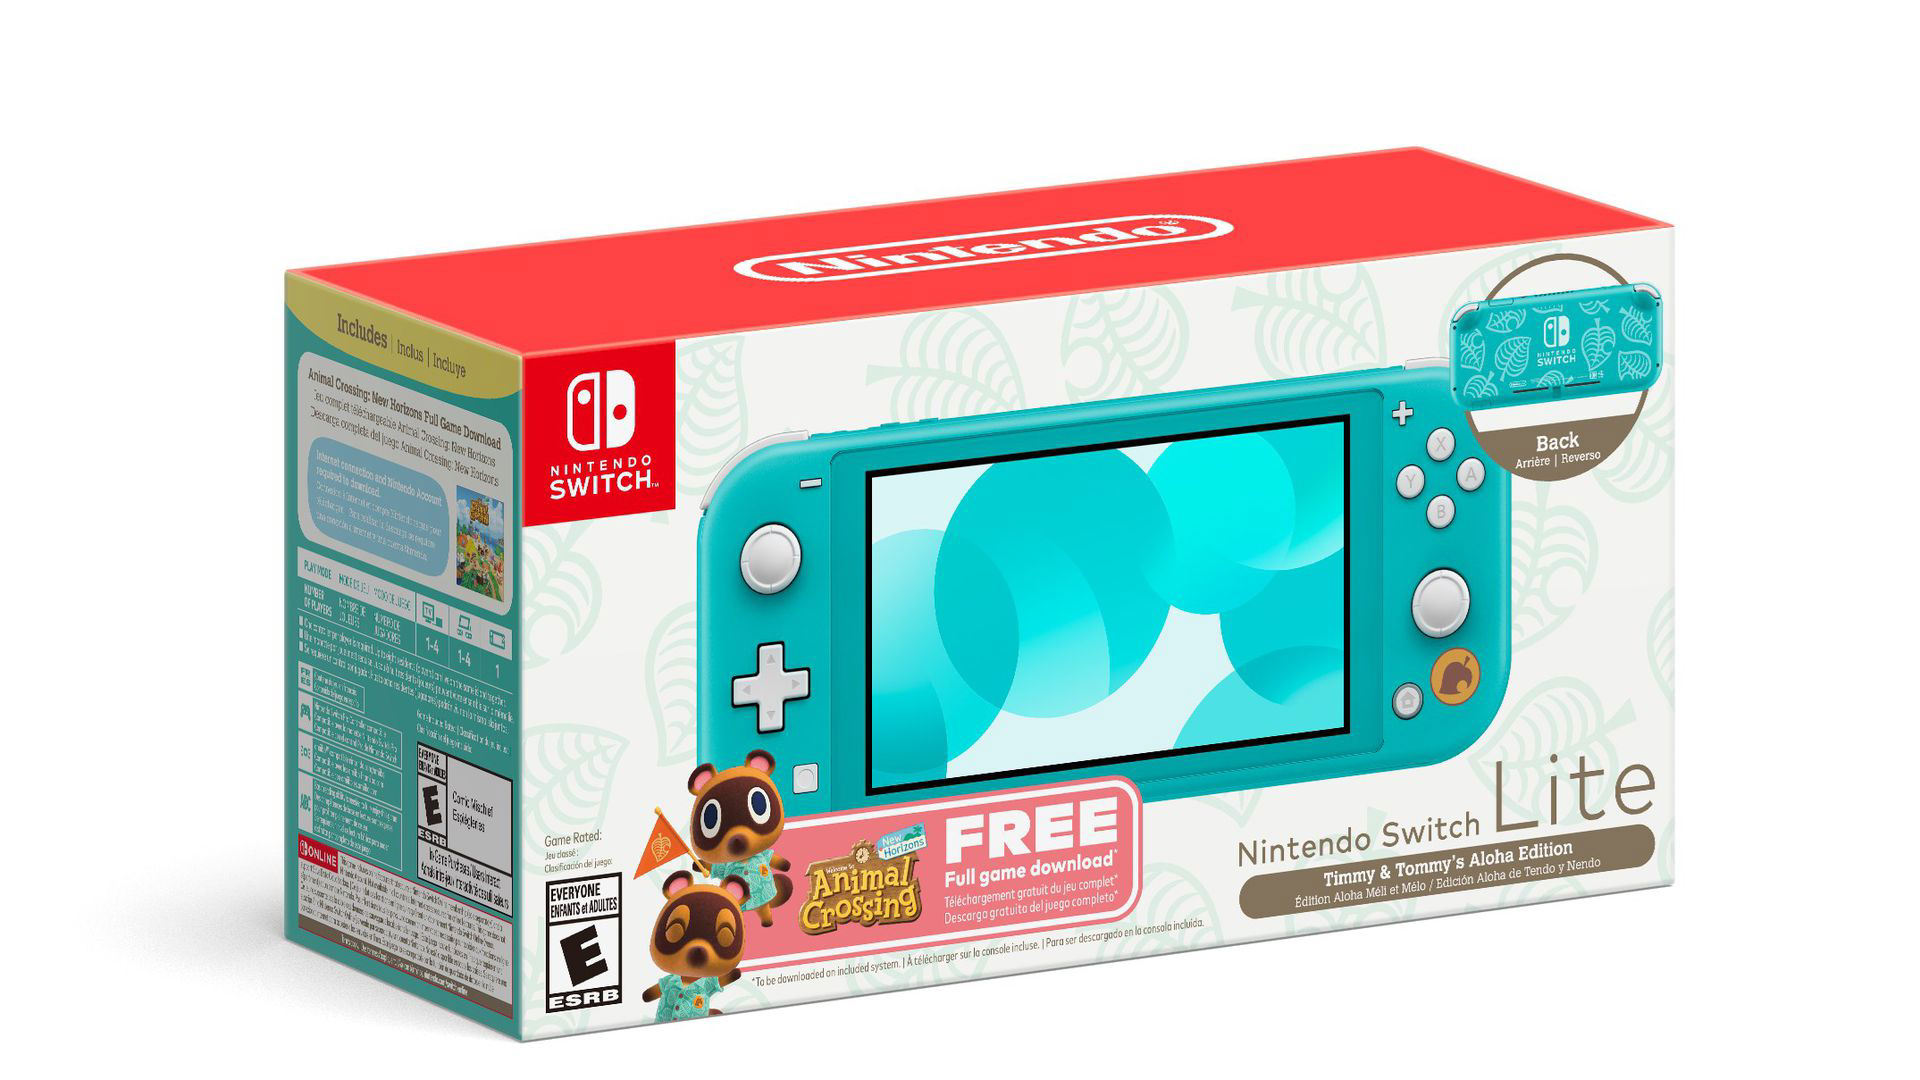 Nintendo’s new Animal Crossing Switch Lite bundle is now available